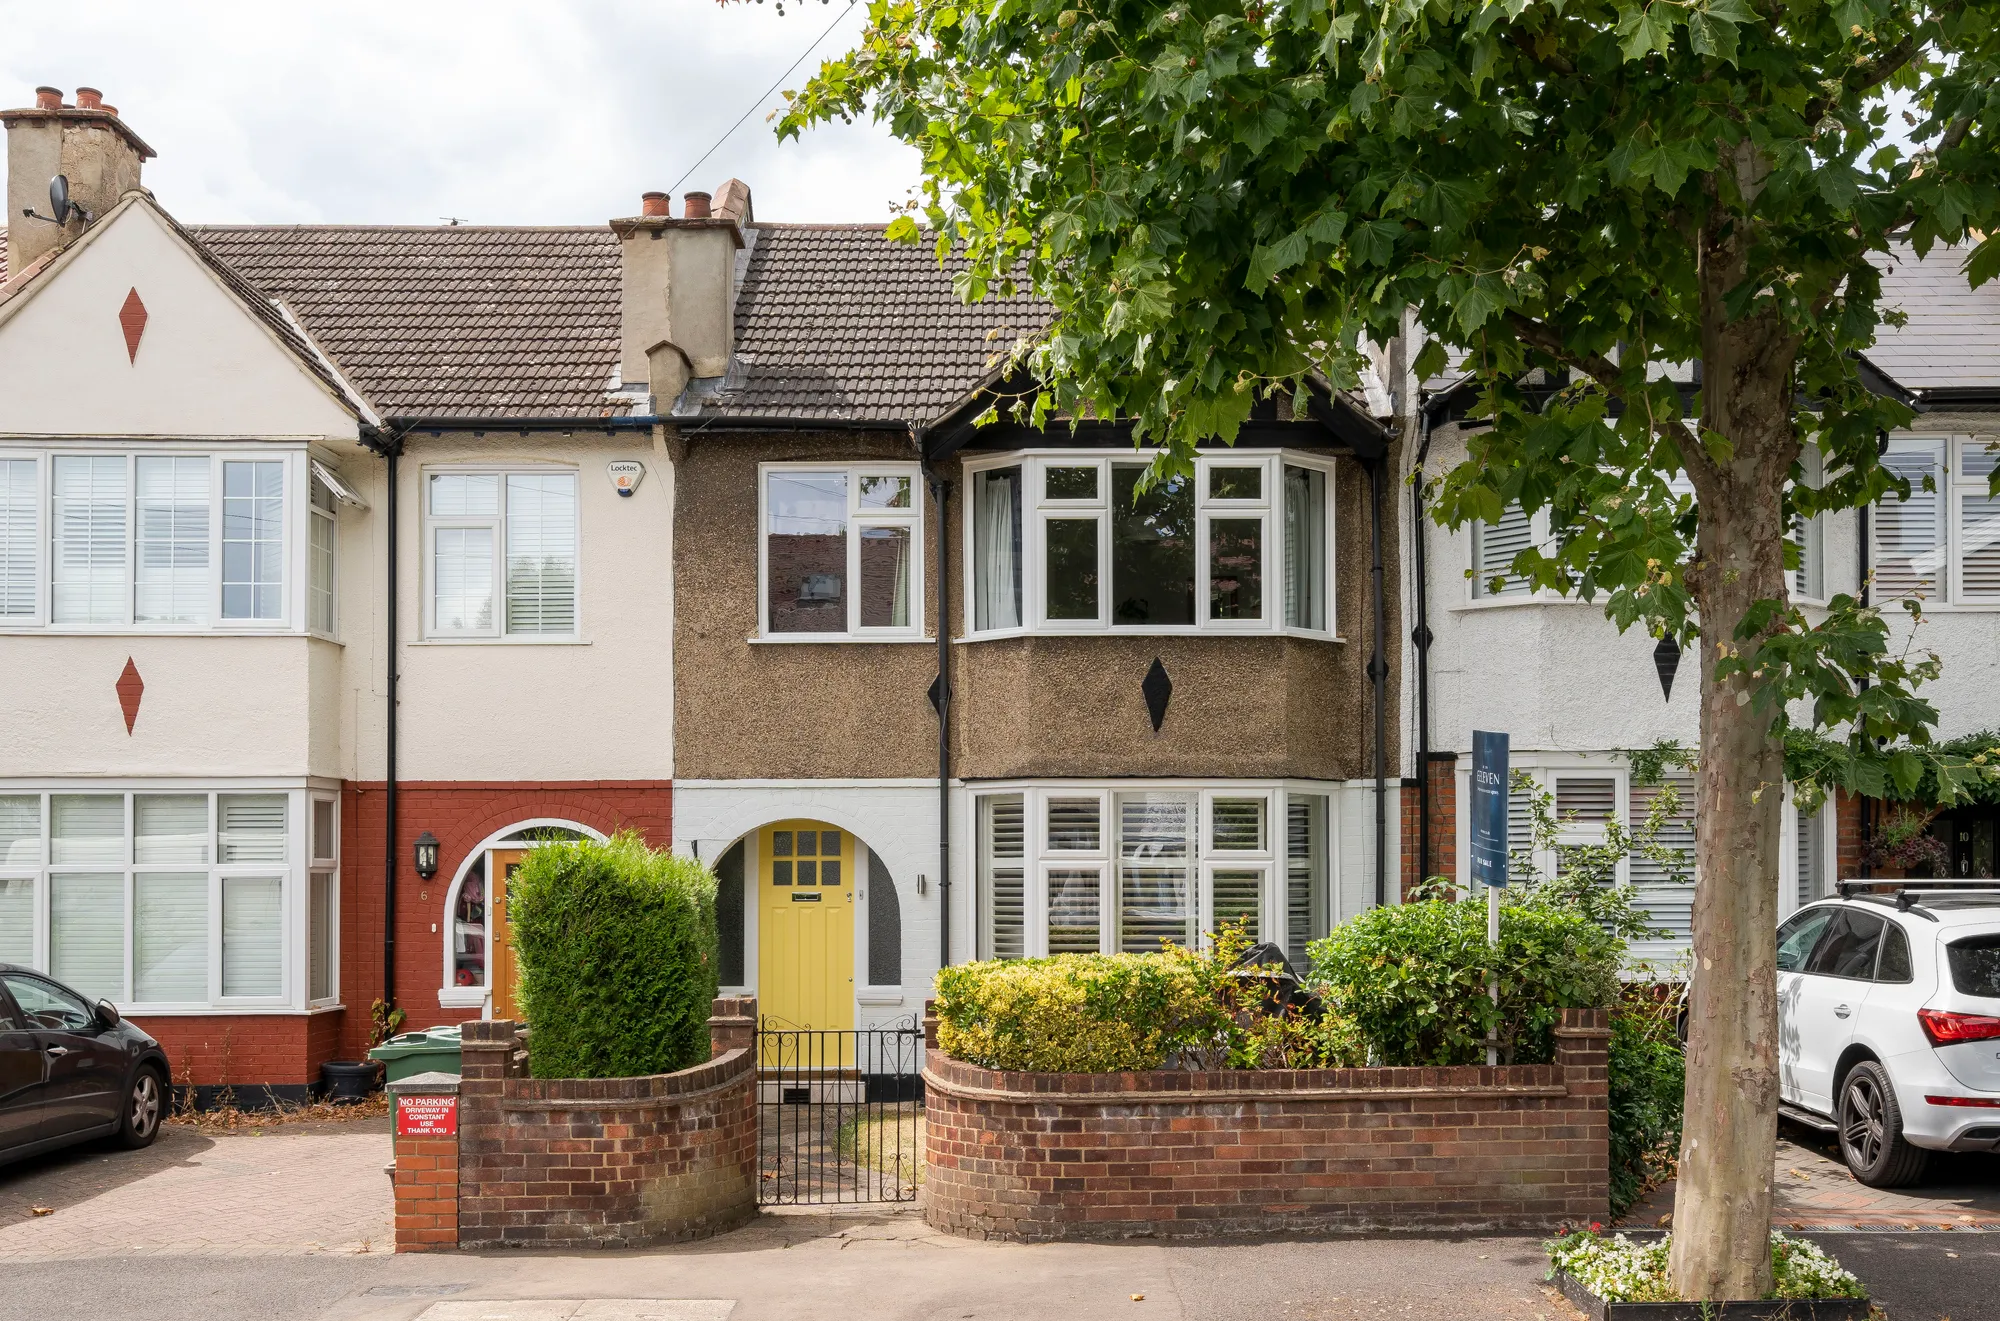 3 bed mid-terraced house for sale in Lambourne Road, Leytonstone - Property Image 1